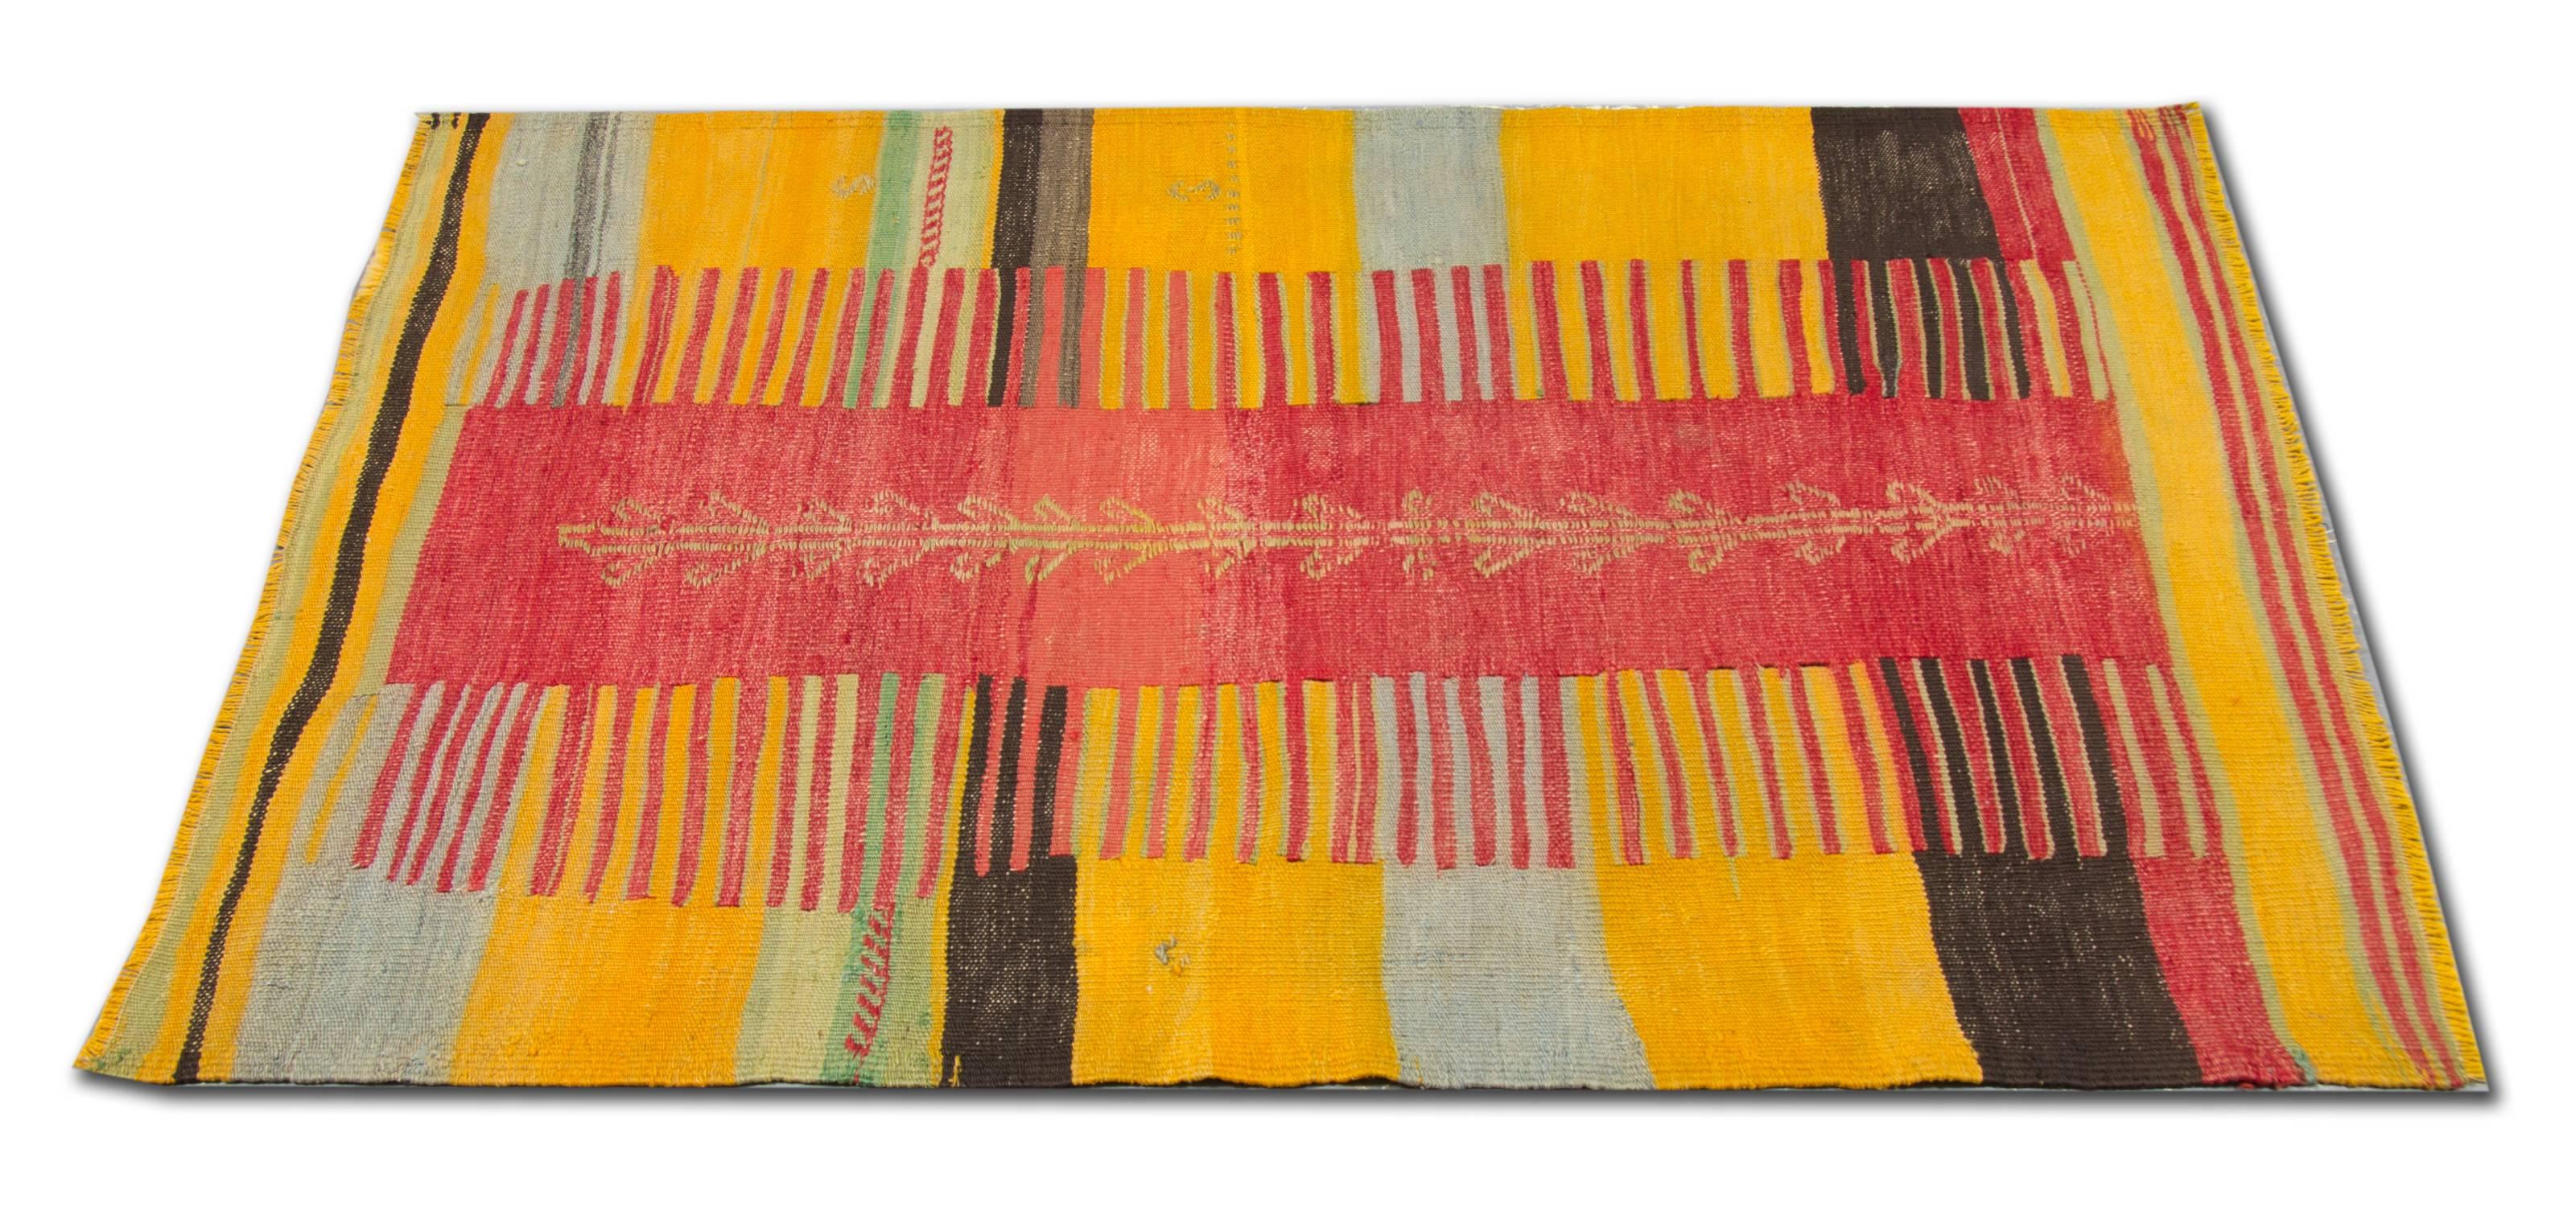 These are antique wool rugs from Aydin, located in the western Anatolia. This geometric rug has distinctive colorful designs. This striped rug has different size stripped patterns in yellow, soft blue, raspberry red and dark brown colors. These